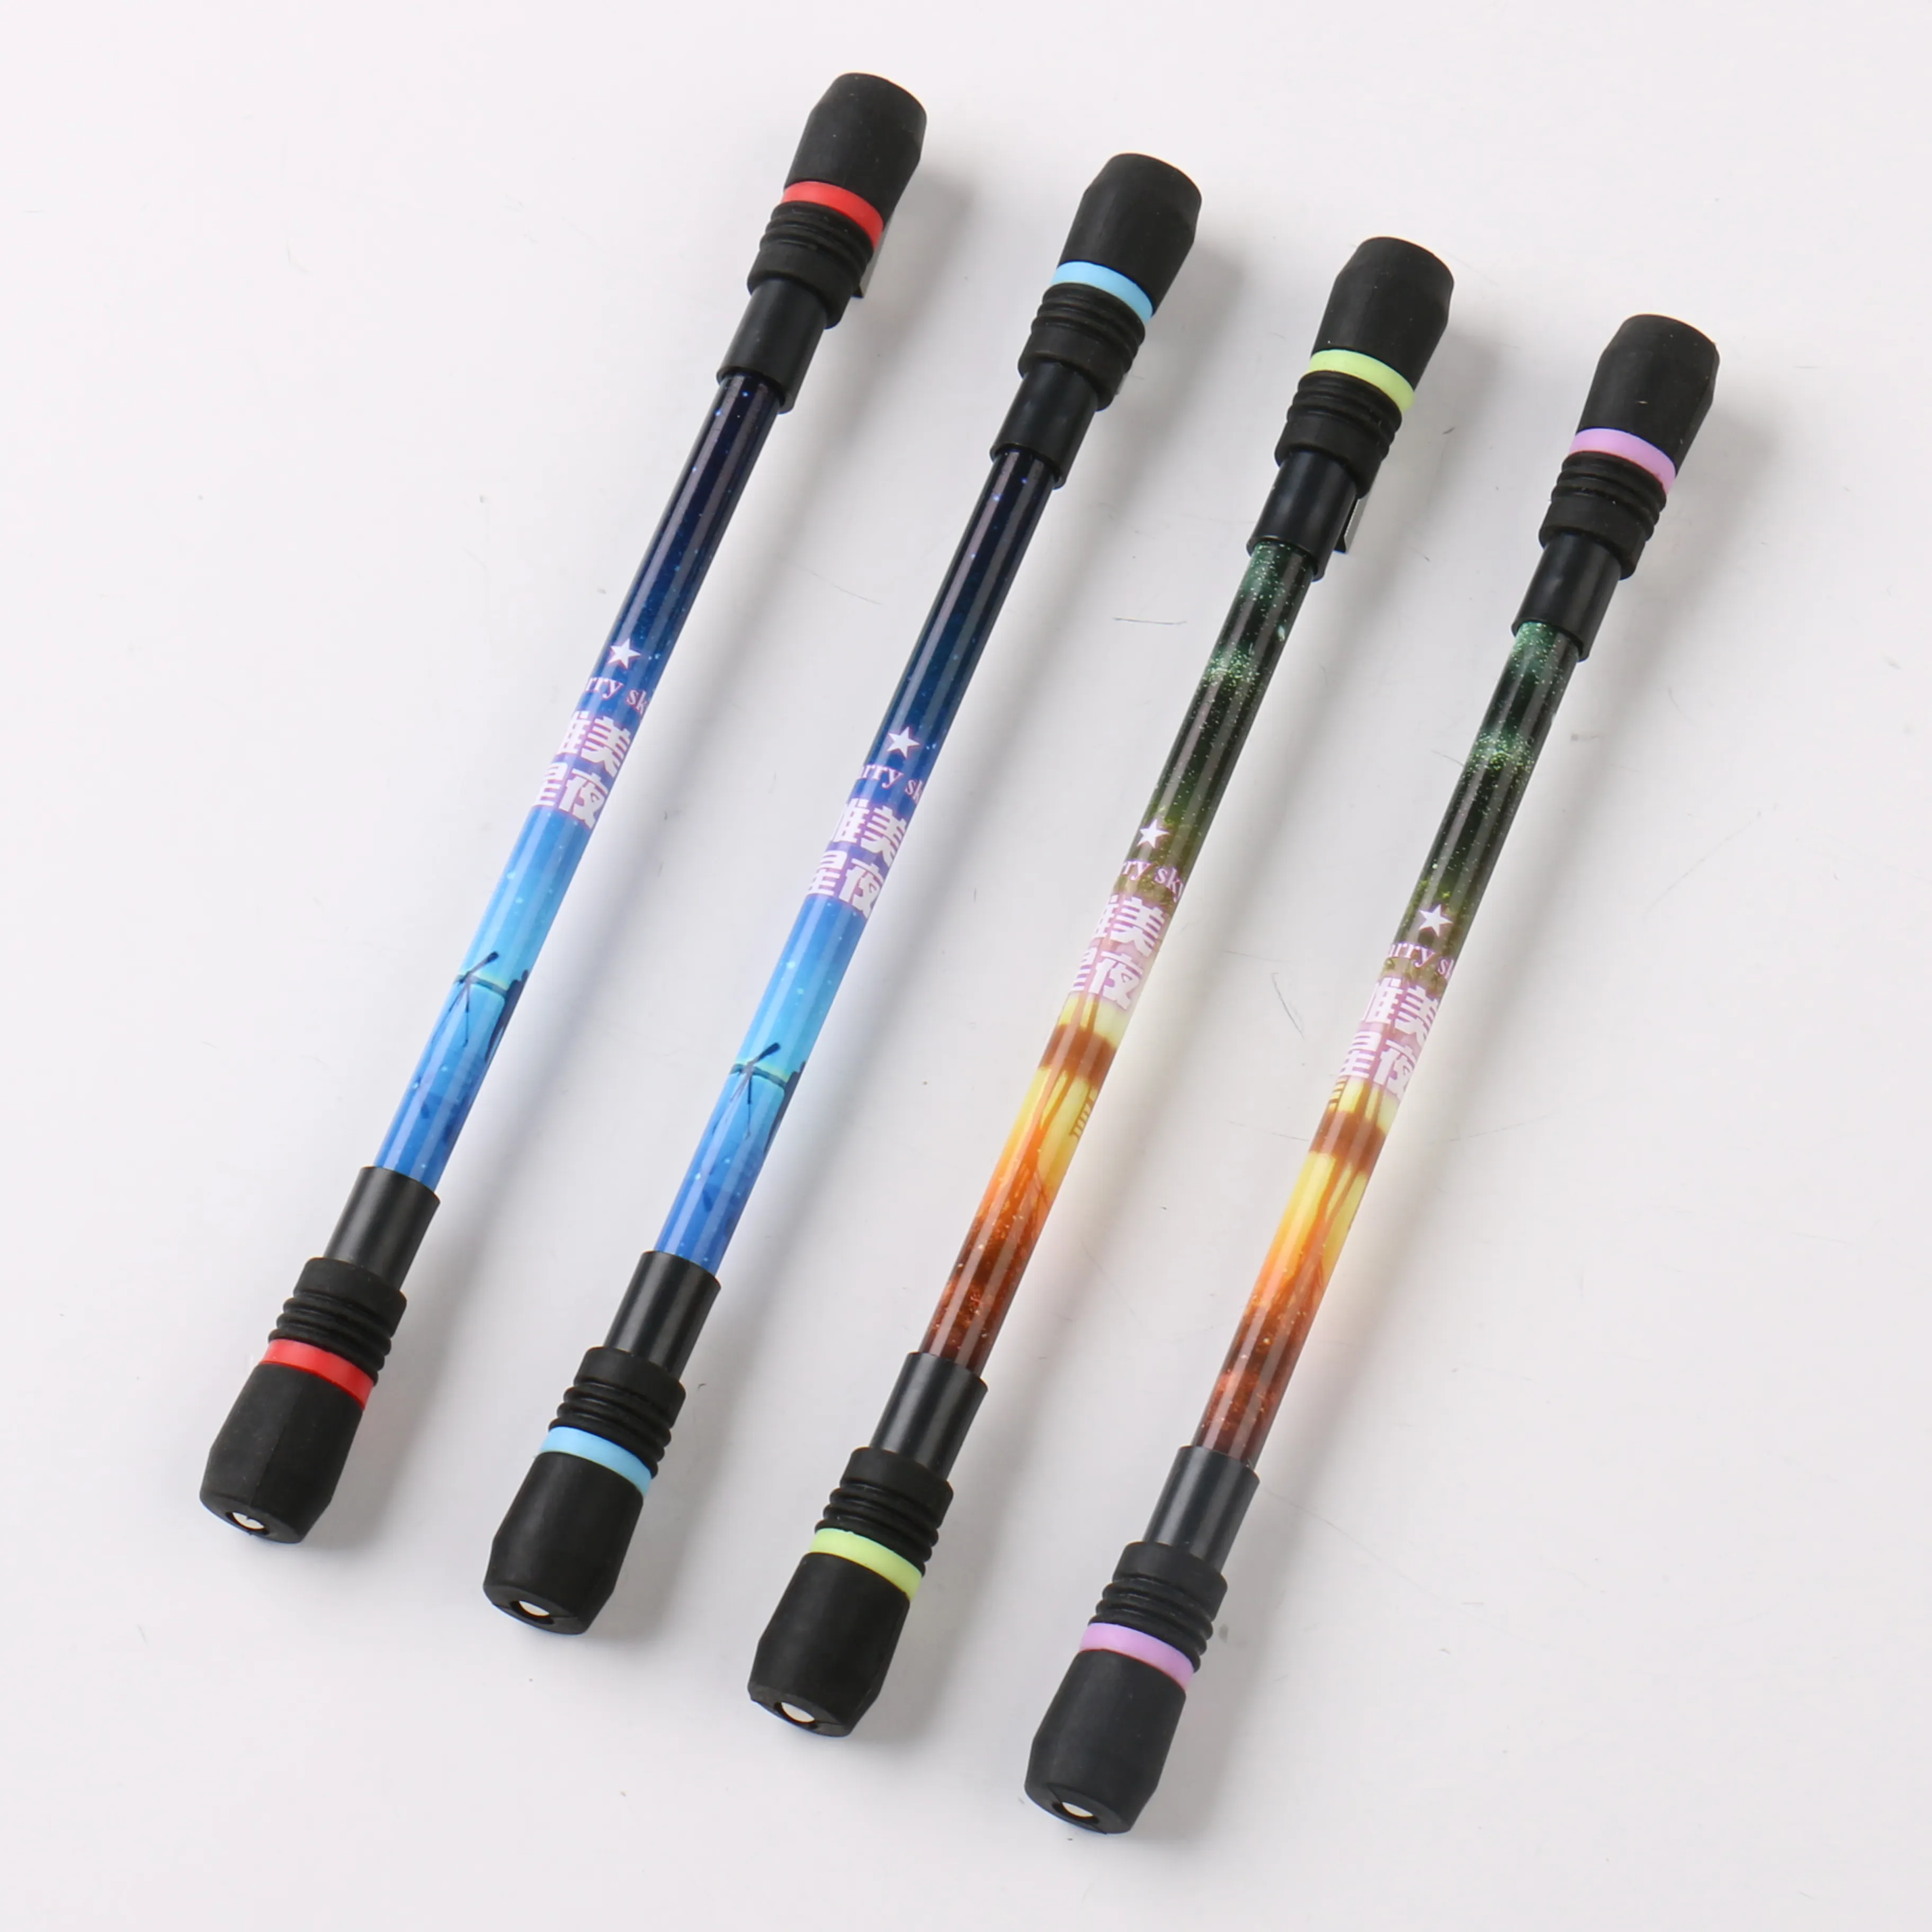 Wholesale Beginners Practice Spinning Pen Pressure Toy Finger Practice Toy Rotary Pen Mods for Relief stress for Student